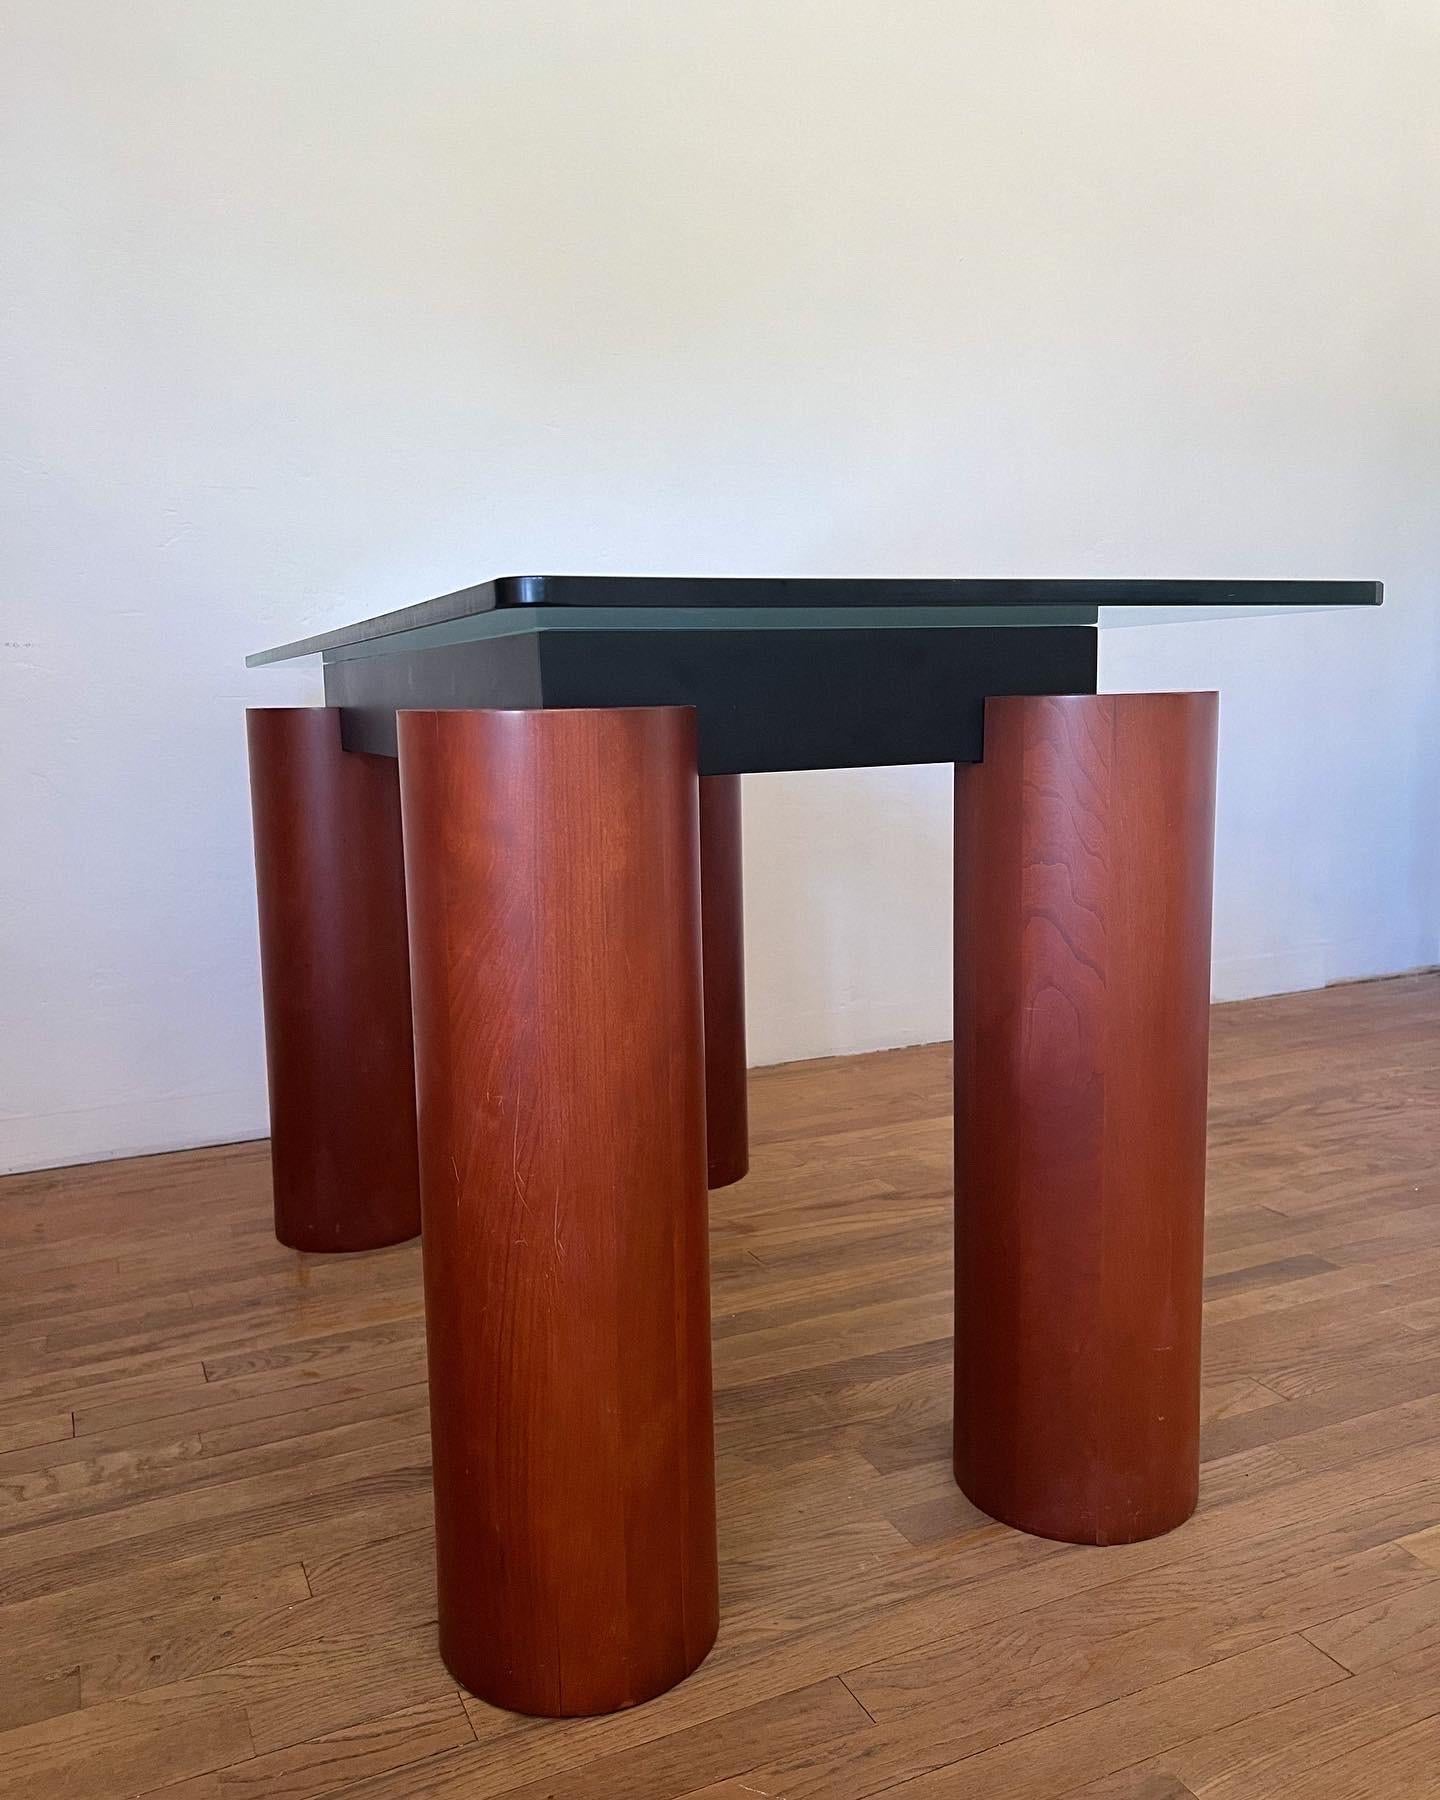 Postmodern console table/desk in the style of the iconic 